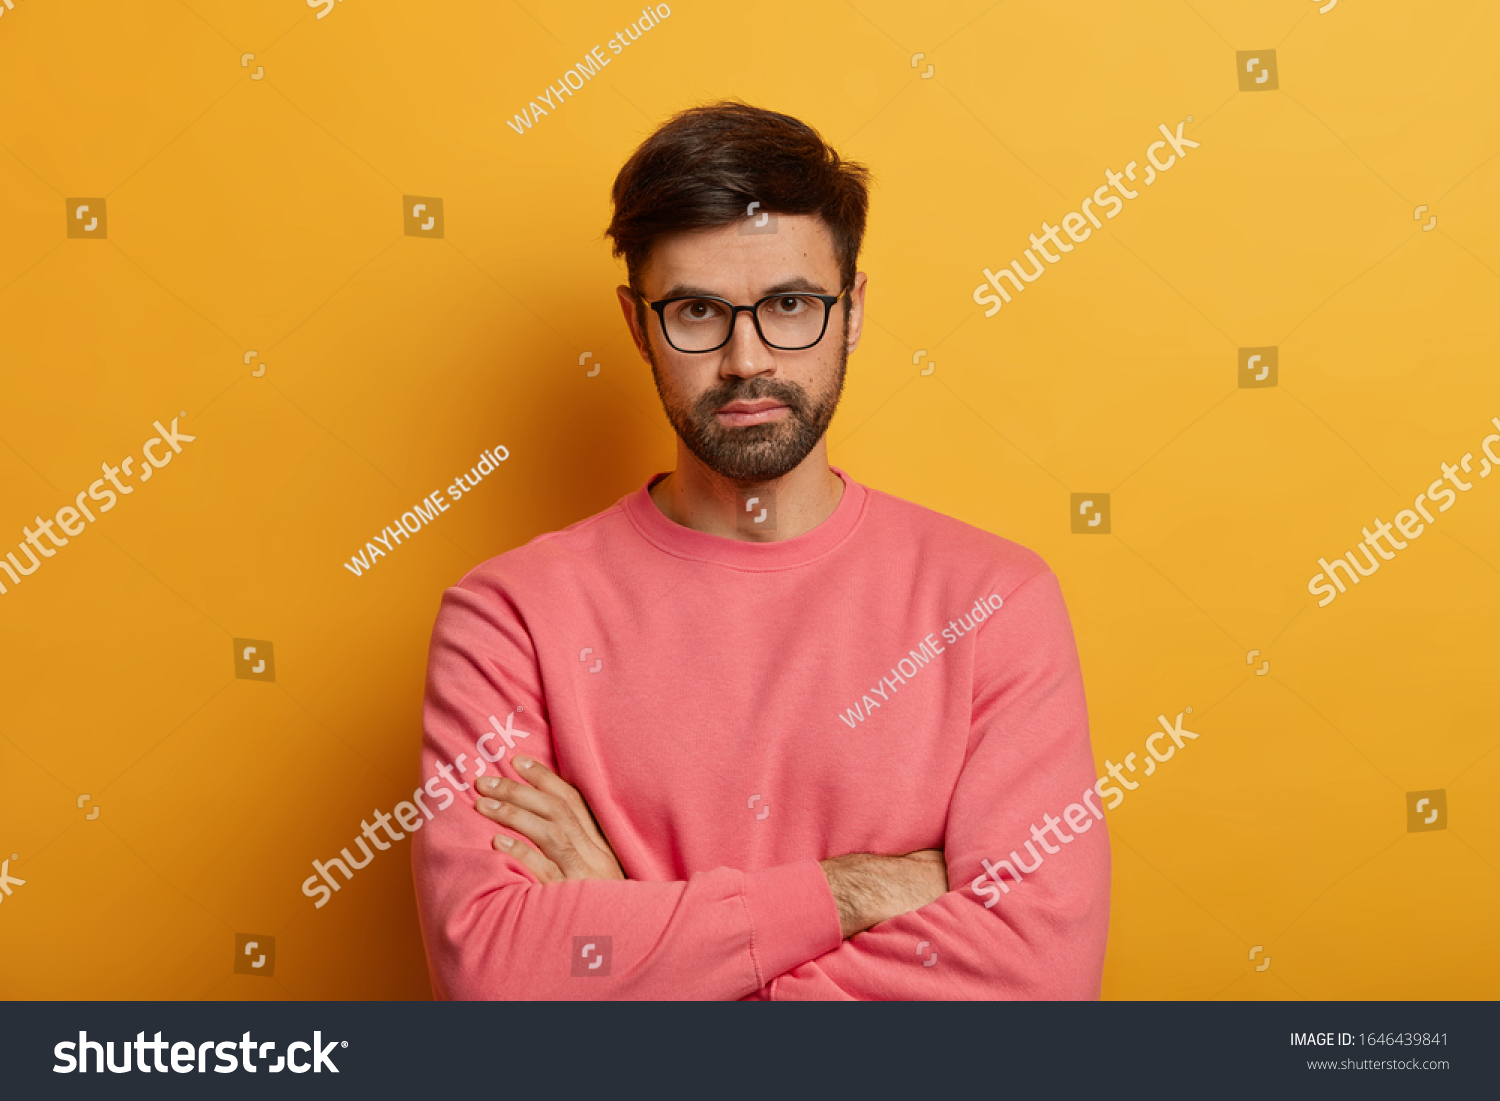 Portrait of self confident serious male entrepreneur keeps hands crossed, looks seriously directly at camera, stands against yellow background discusses necessary things with partner wears pink jumper #1646439841